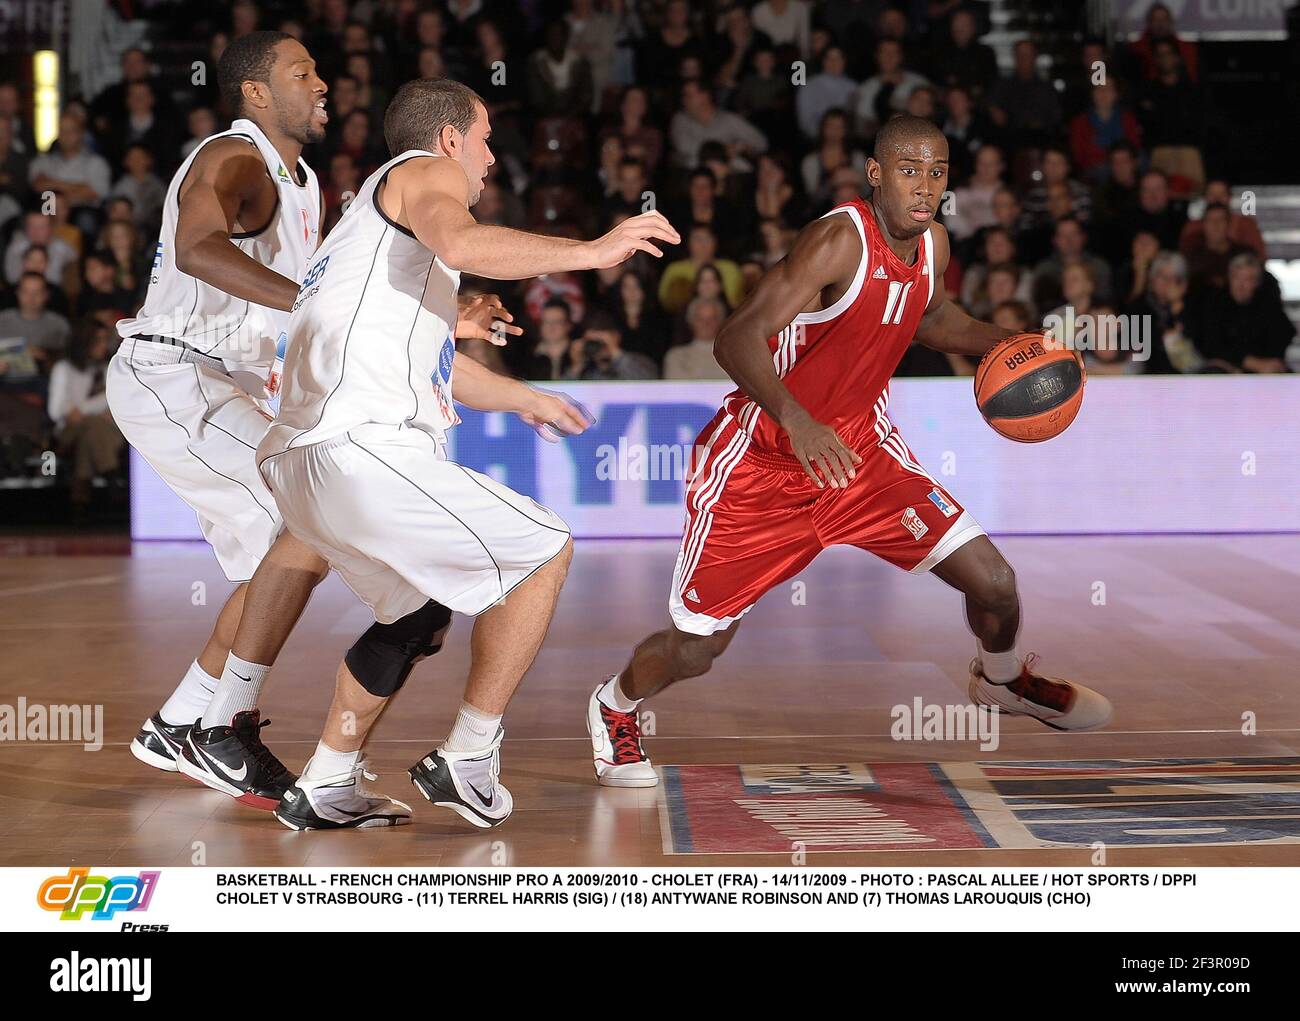 BASKETBALL - FRENCH CHAMPIONSHIP PRO A 2009/2010 - CHOLET (FRA) -  14/11/2009 - PHOTO : PASCAL ALLEE / HOT SPORTS / DPPICHOLET V STRASBOURG -  (11) TERREL HARRIS (SIG) / (18) ANTYWANE ROBINSON AND (7) THOMAS LAROUQUIS  (CHO Stock Photo - Alamy